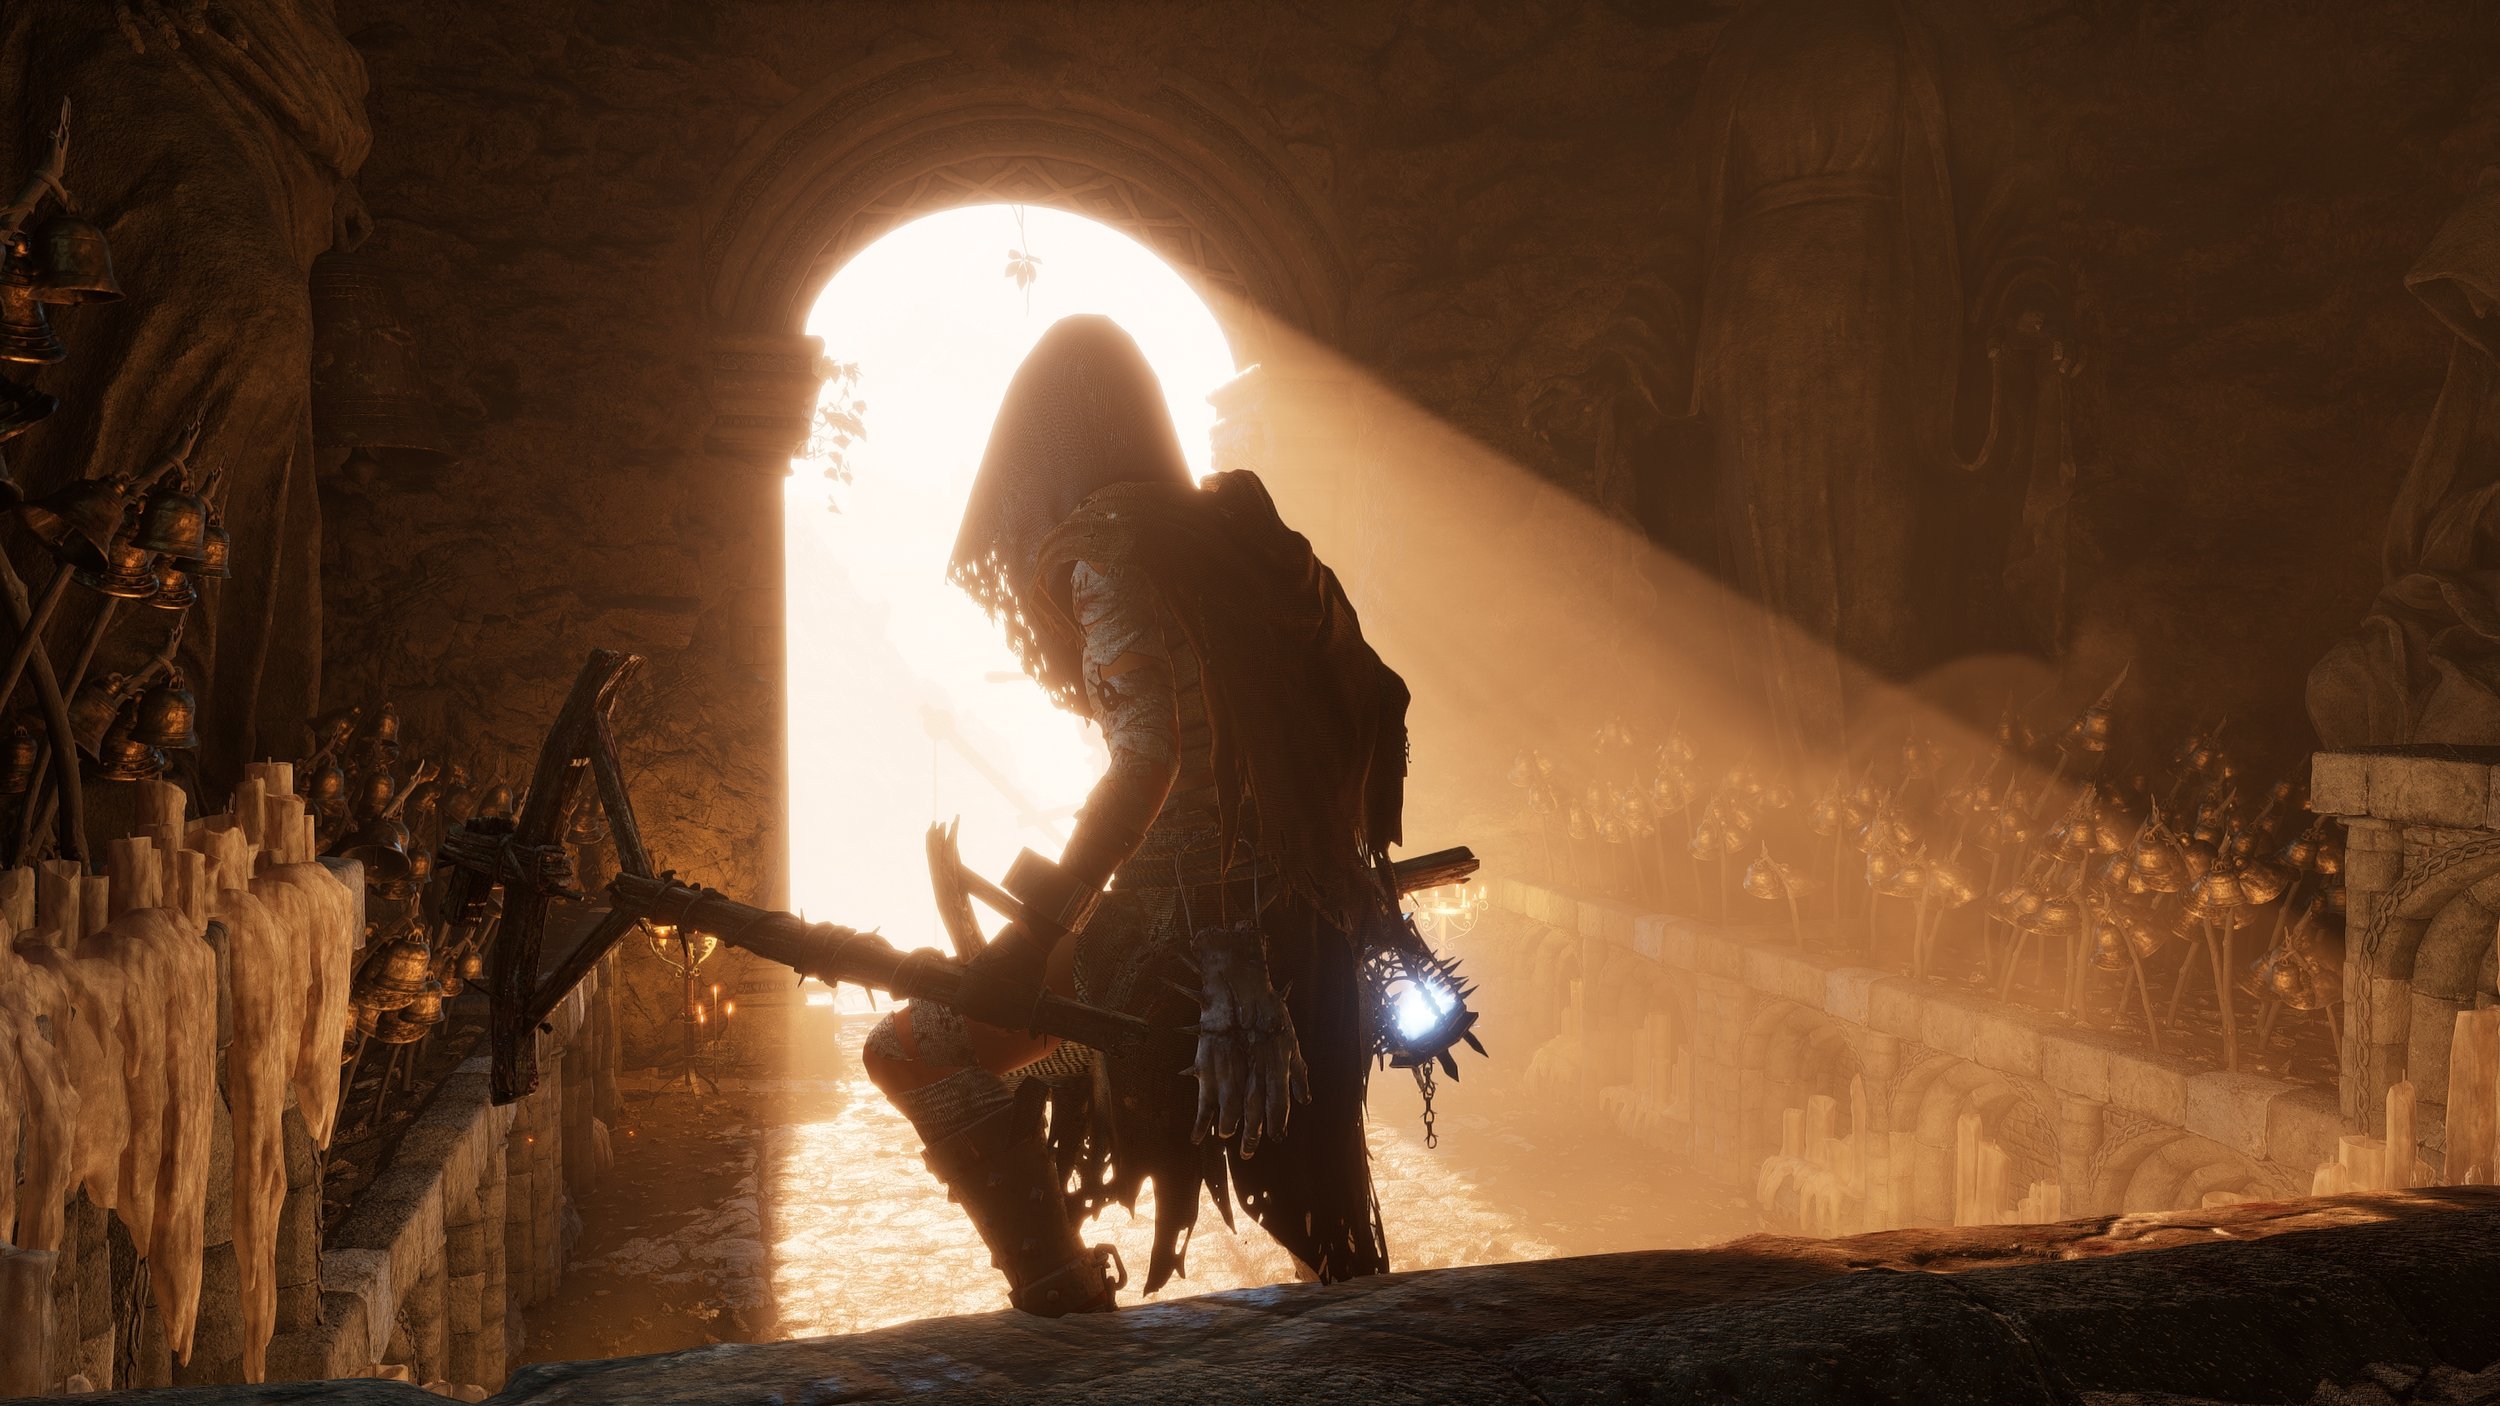 Lords of the Fallen: Make Your Way Through the Catacombs and Beat